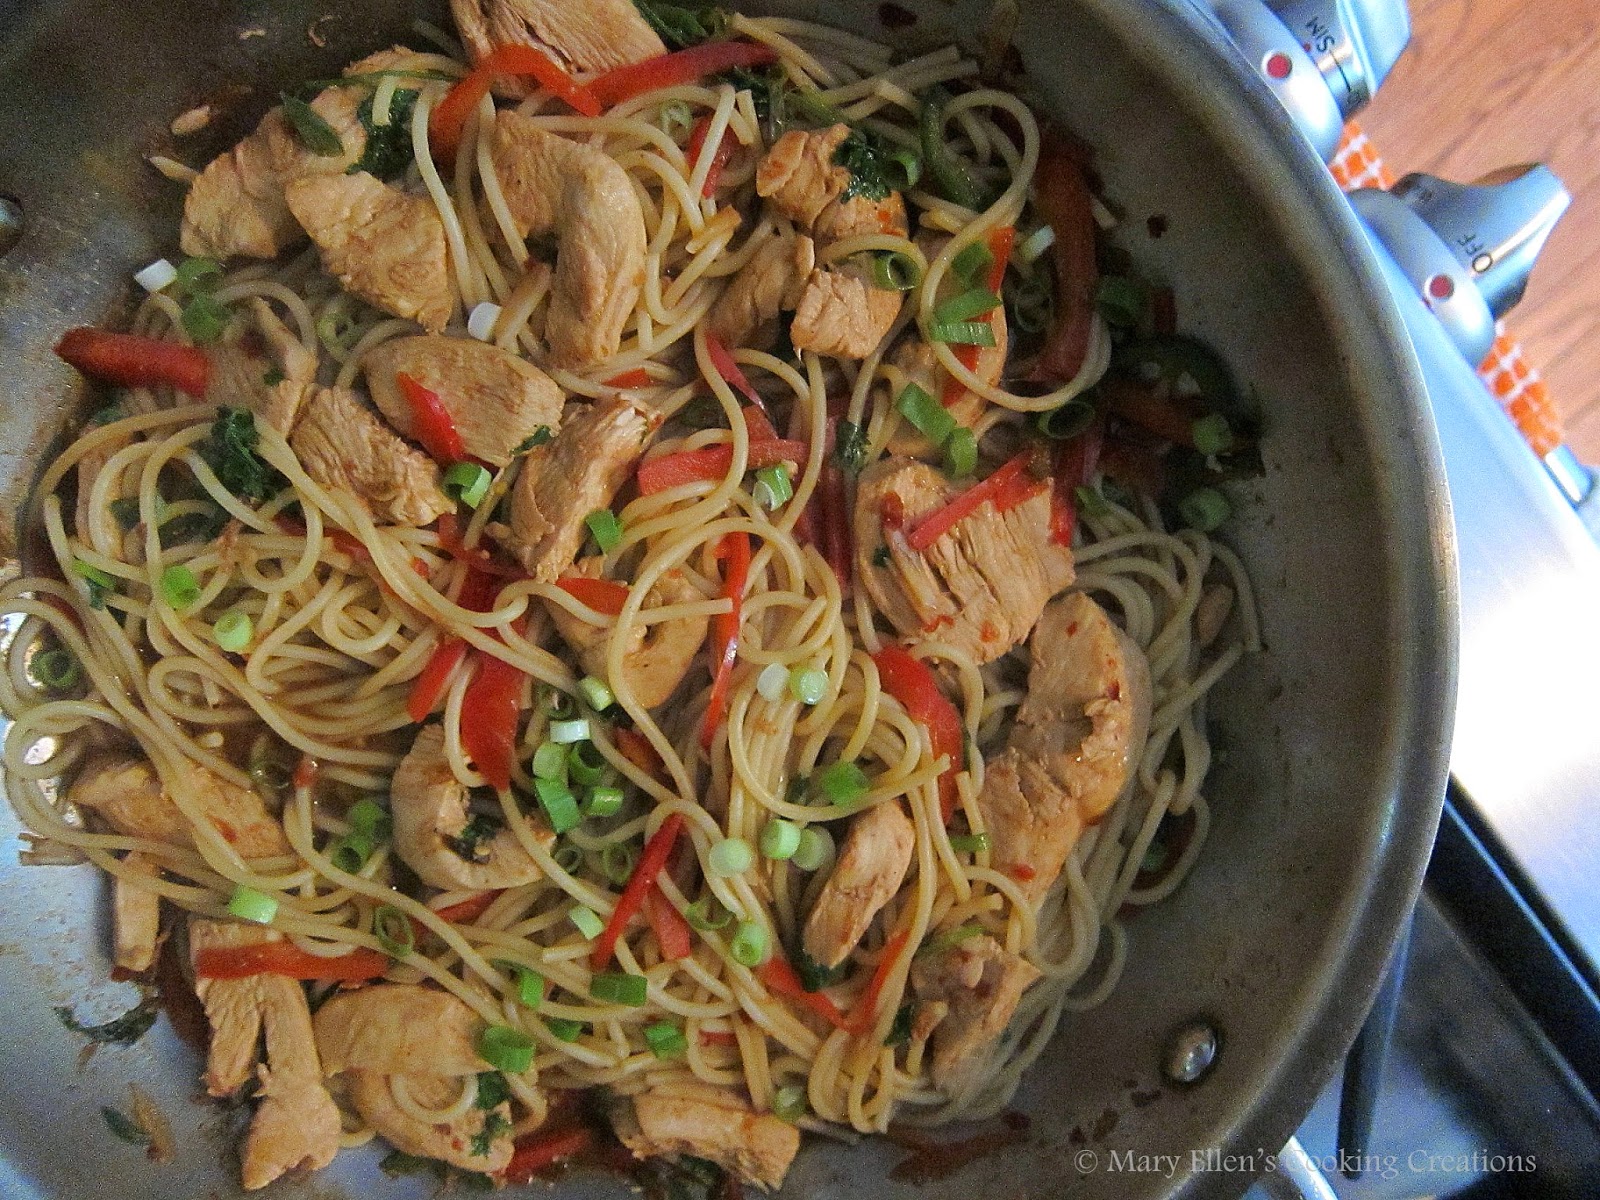 Mary Ellen's Cooking Creations: Spicy Thai Chicken and Noodles